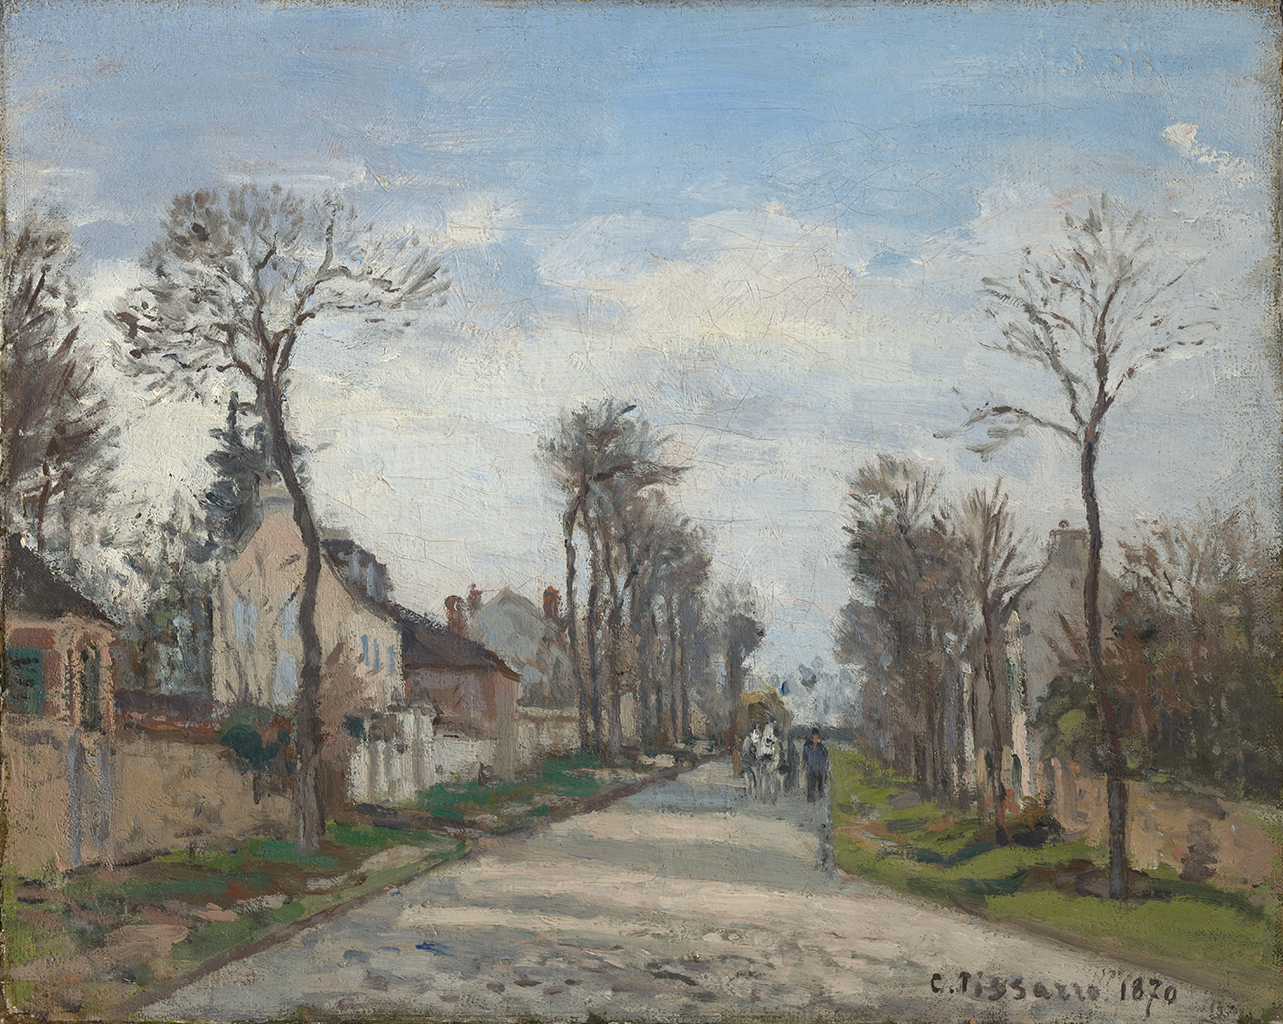 An impressionist-style painting of a road between a set of buildings and trees. On the path, there is a carriage being pulled by a white horse. Near it, is a figure also walking.